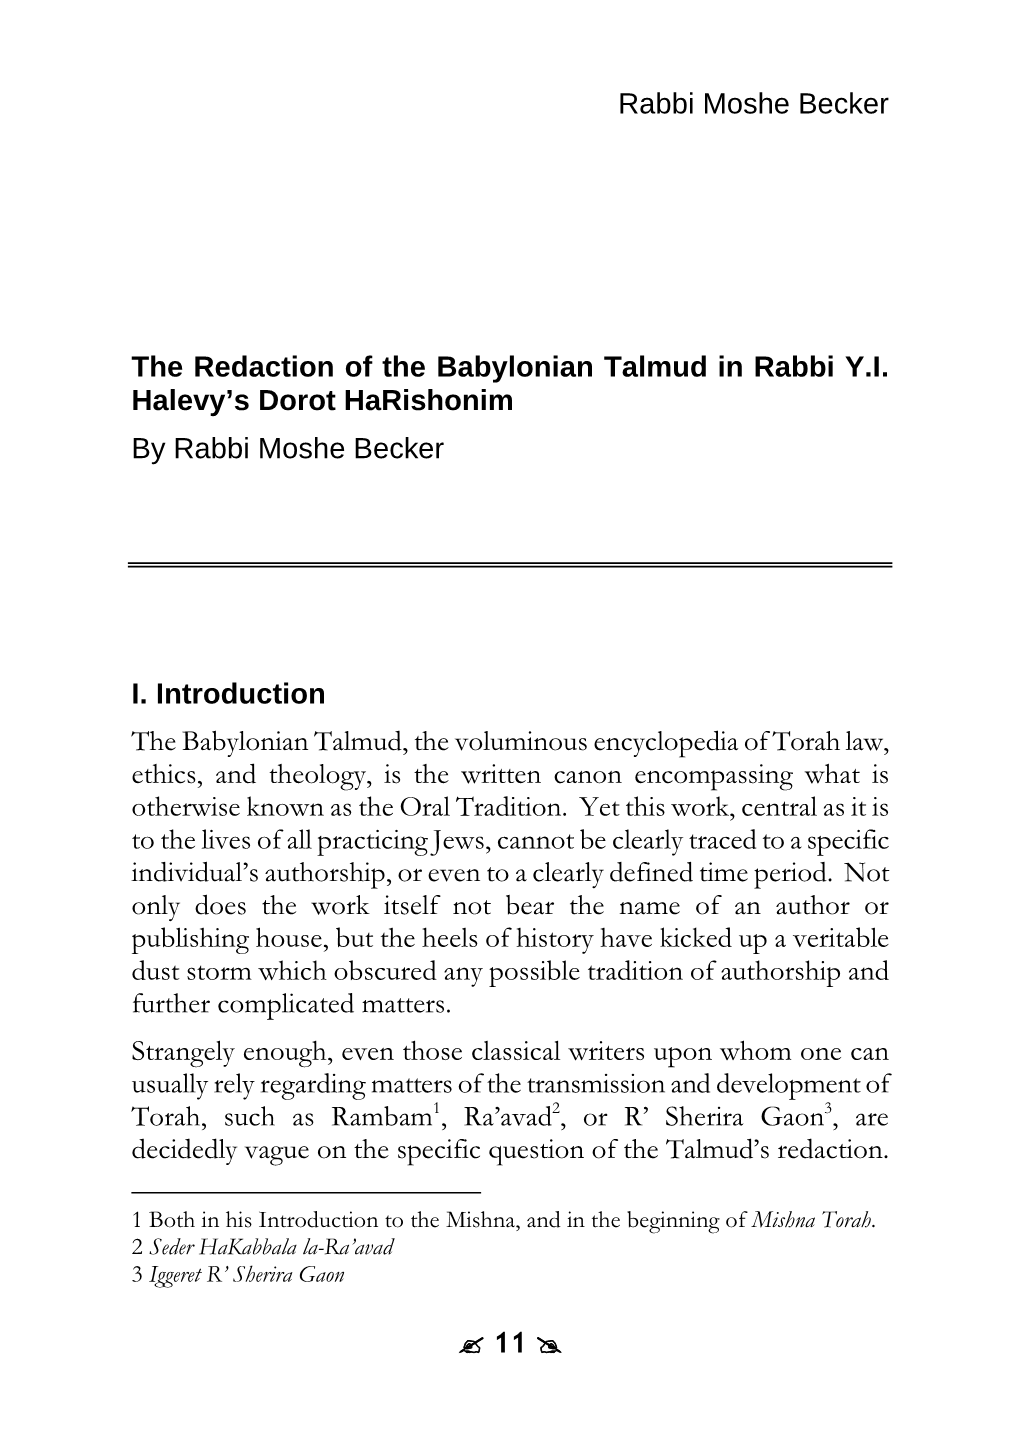 The Redaction of the Babylonian Talmud in Rabbi Y.I. Halevy's Dorot